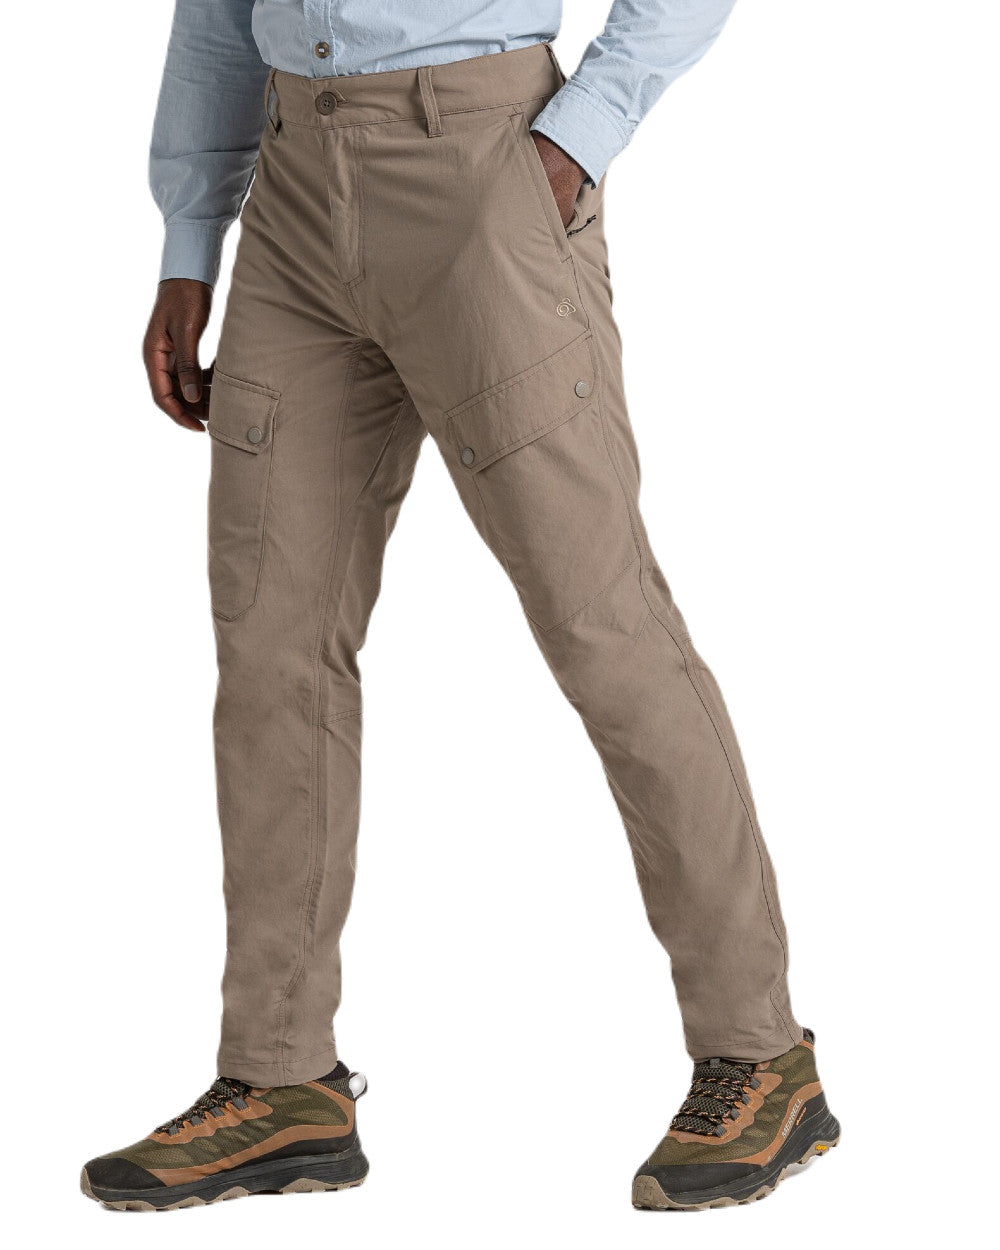 Pebble Coloured Craghoppers Mens NosiLife Adventure Trousers On A White Background 